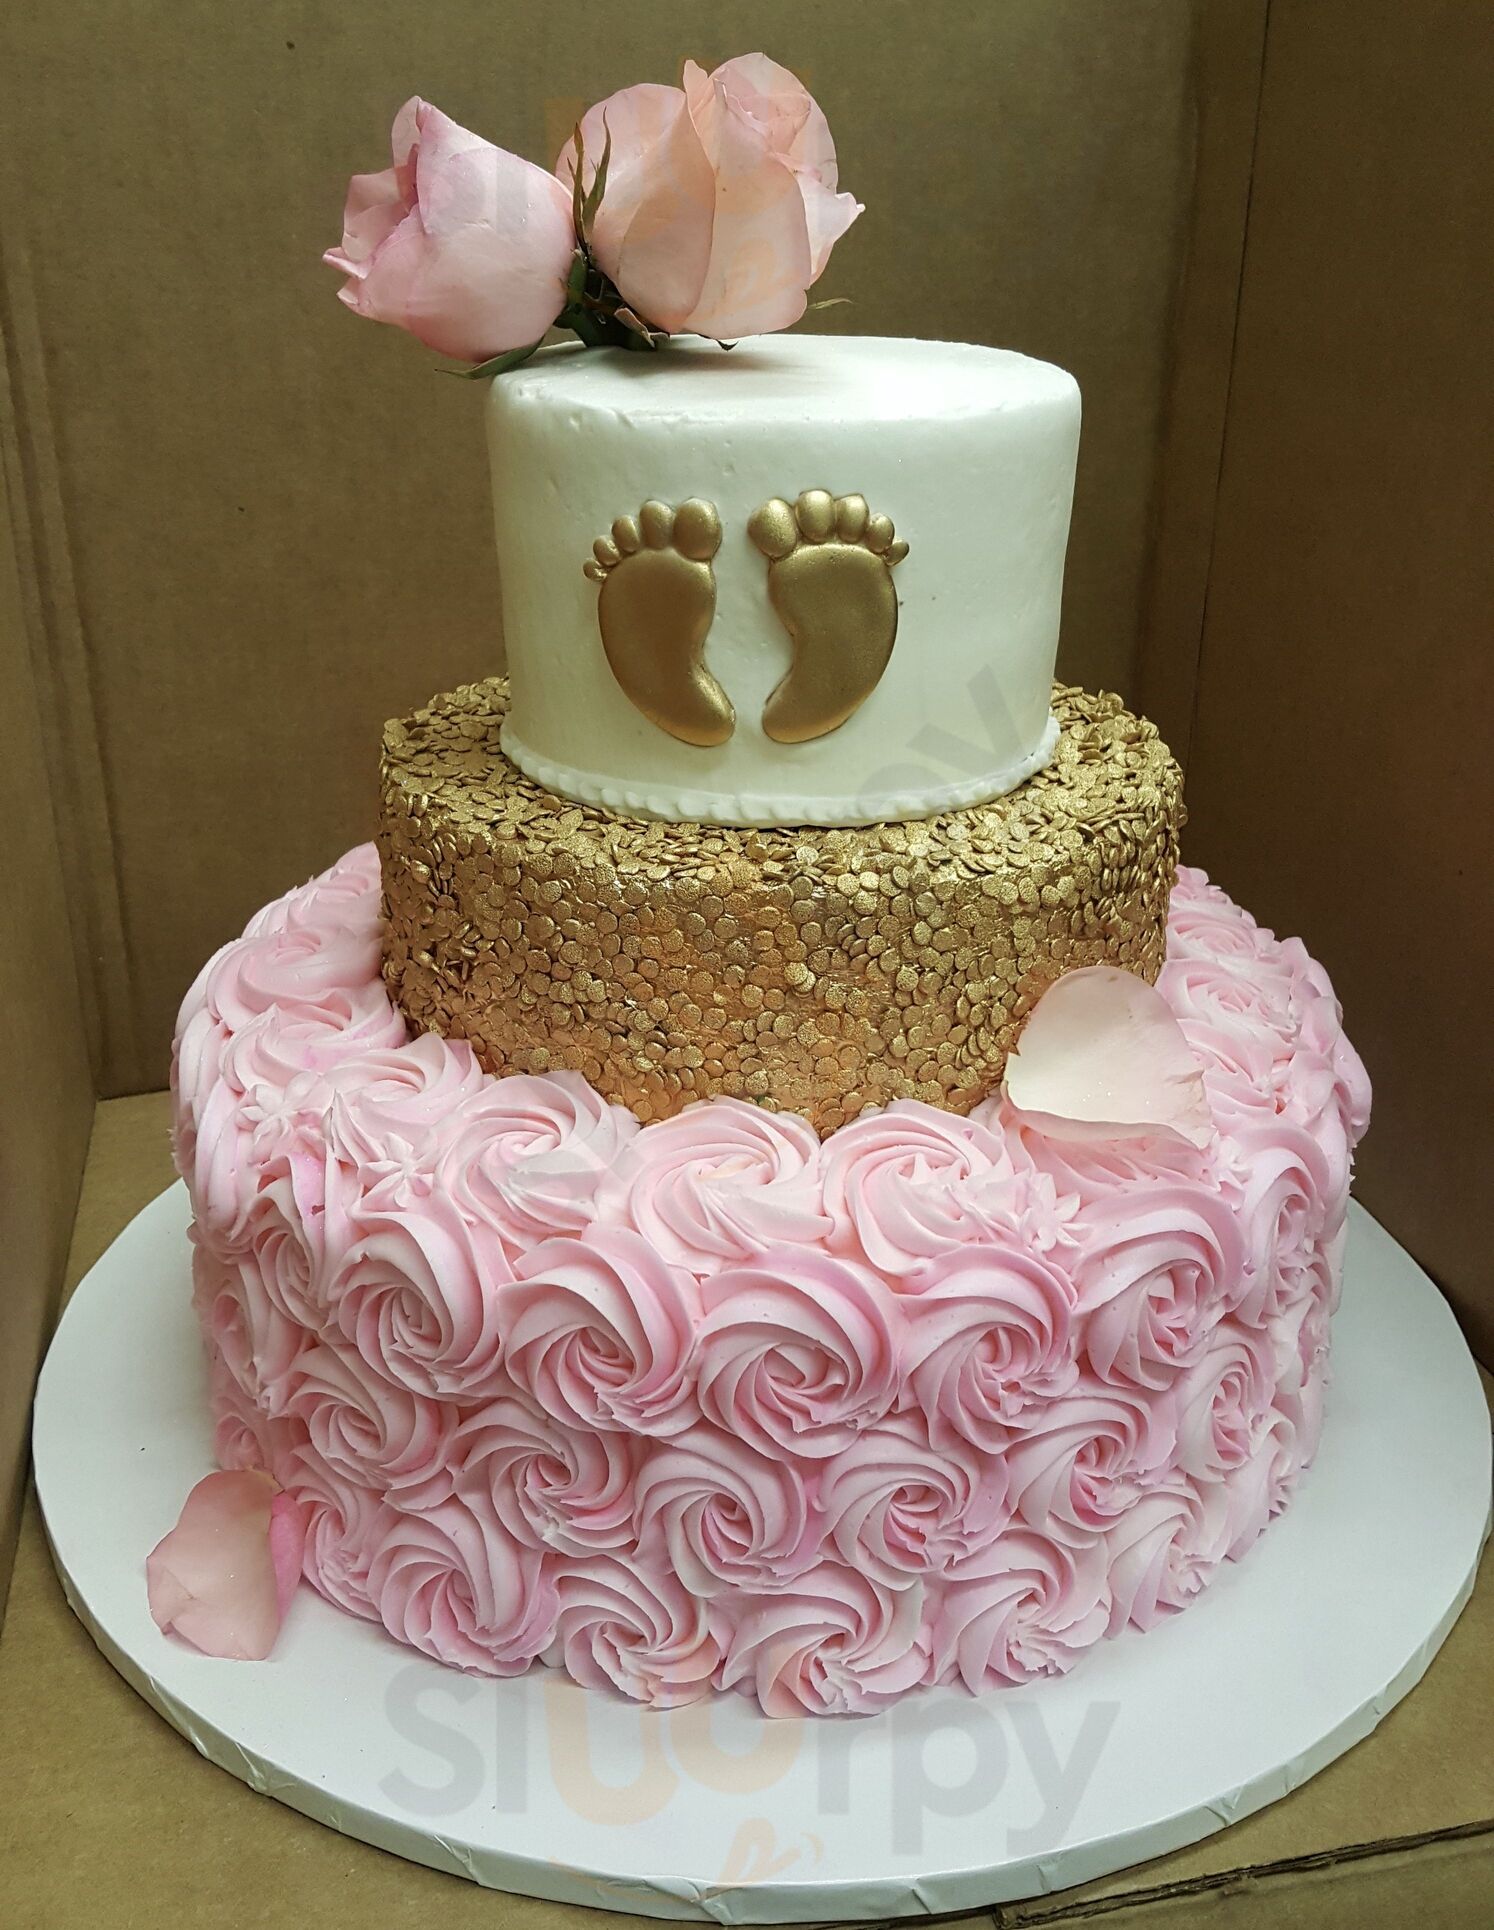 Diaper Cakes for Sale! The widest selection of diaper cakes! – Diaper Cakes  Mall